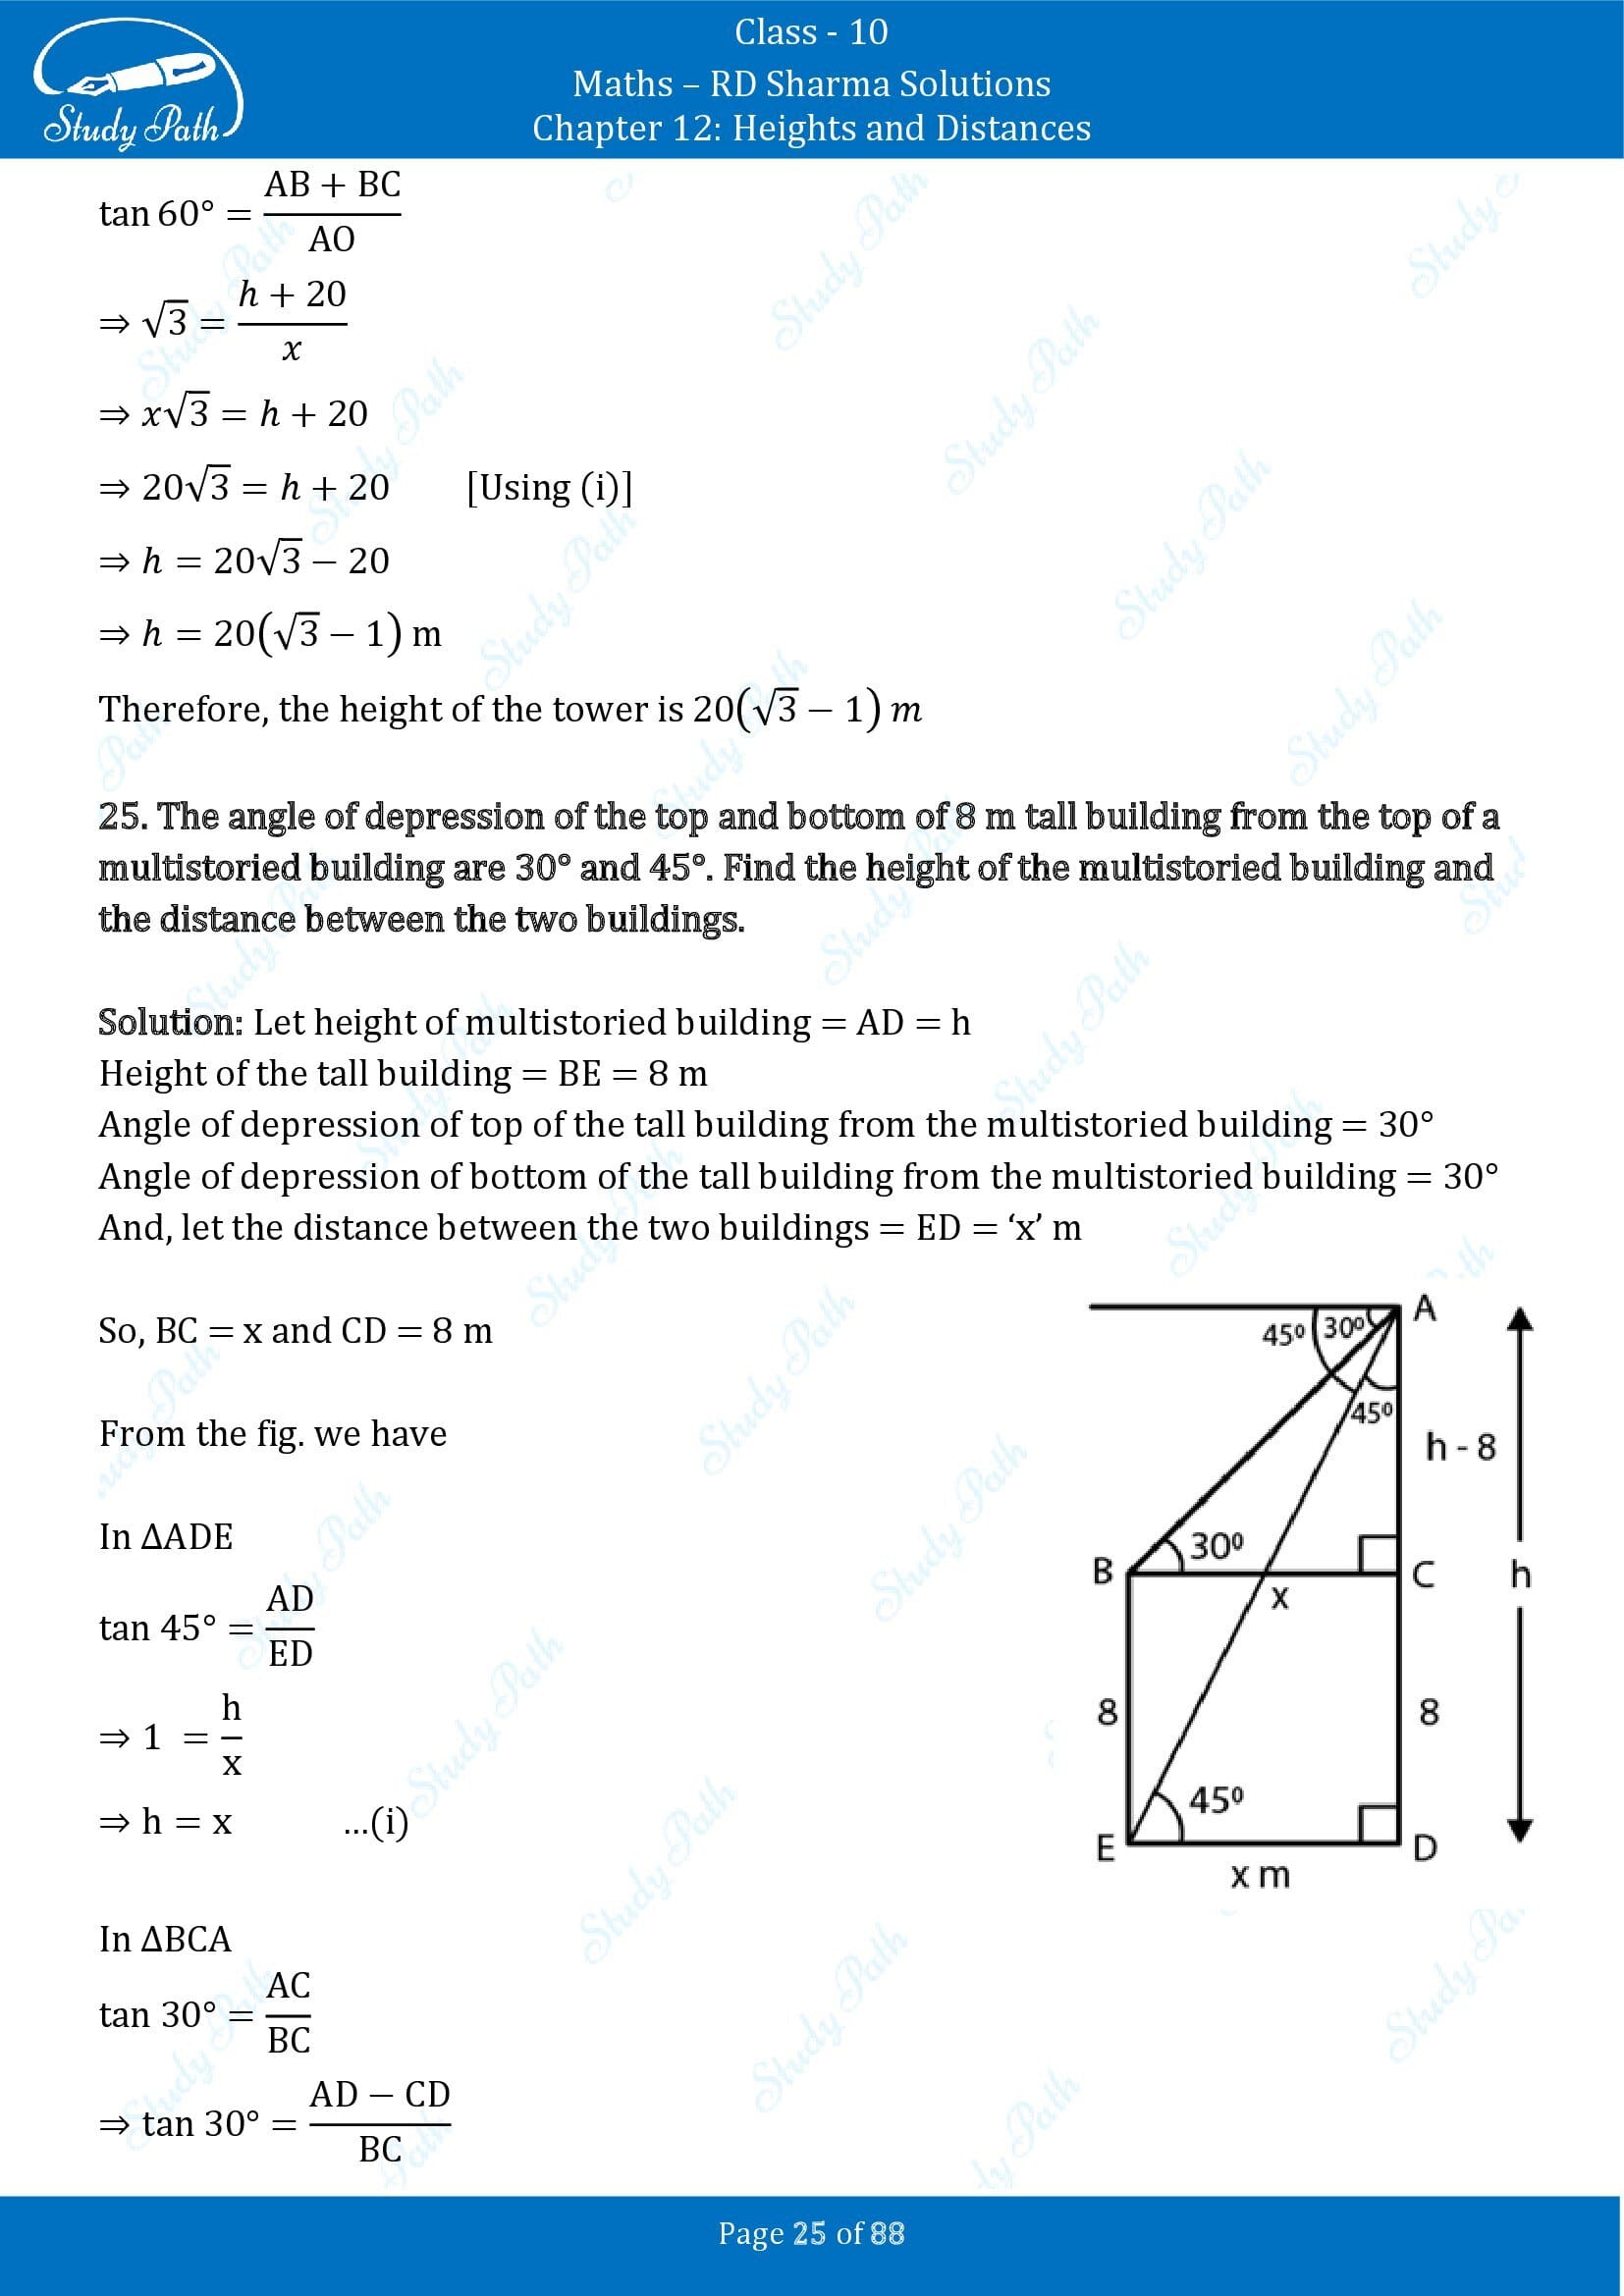 RD Sharma Solutions Class 10 Chapter 12 Heights and Distances Exercise 12.1 00025